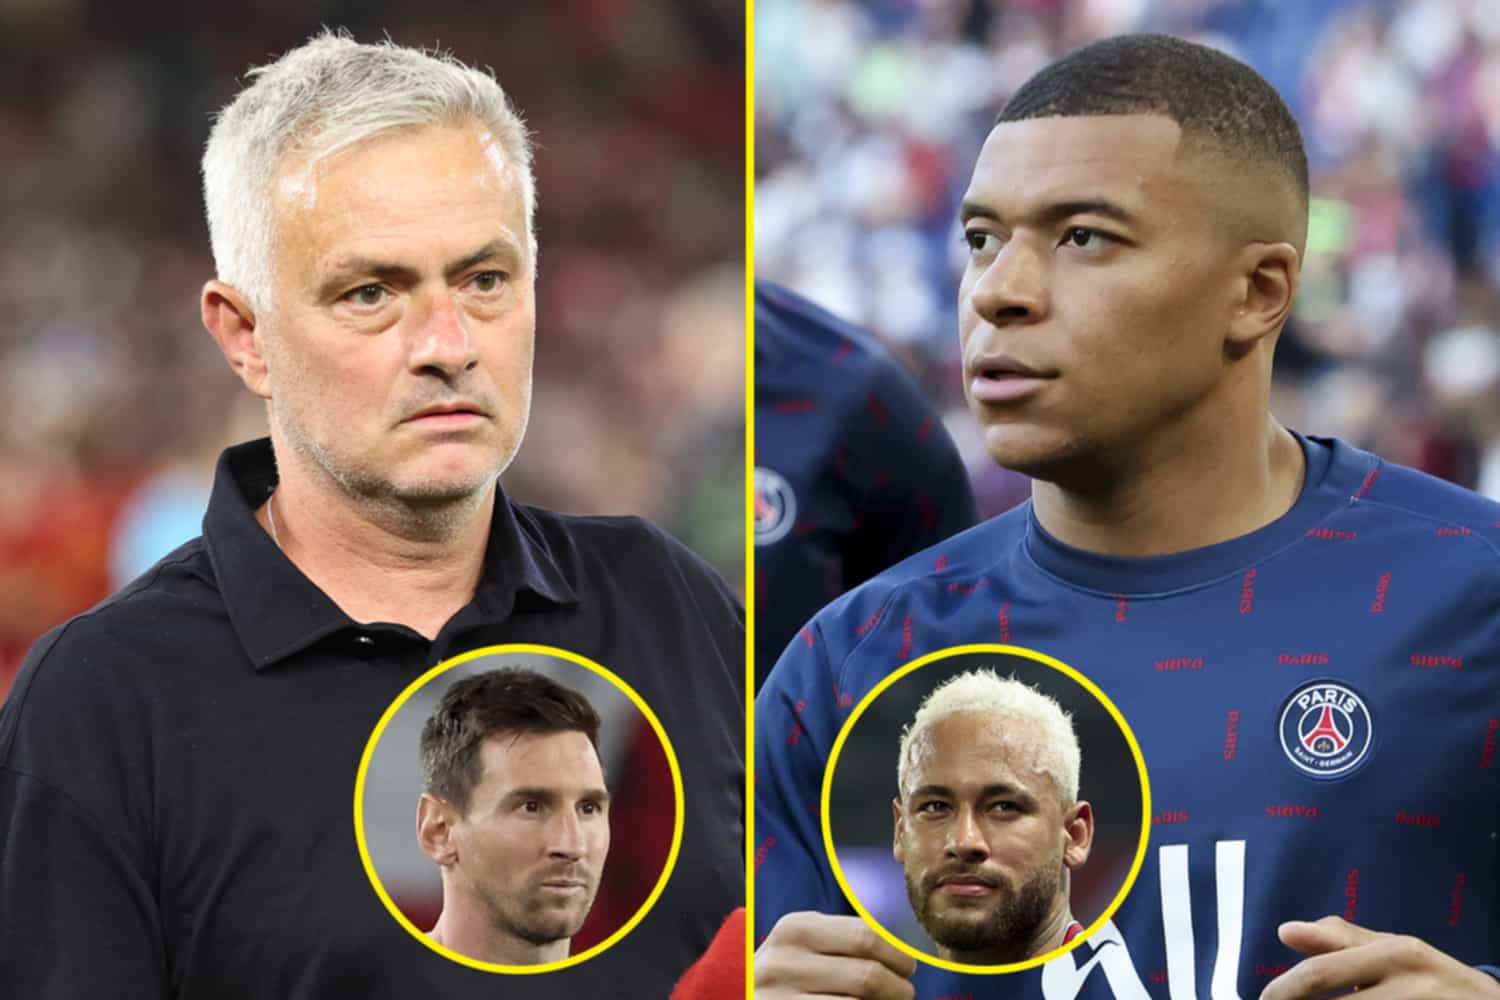 Jose Mourinho hailed Lionel Messi as ‘the God of football’, compared Kylian Mbappe to Ronaldo, loves Neymar and could find lure of Paris Saint-Germain impossible to resist